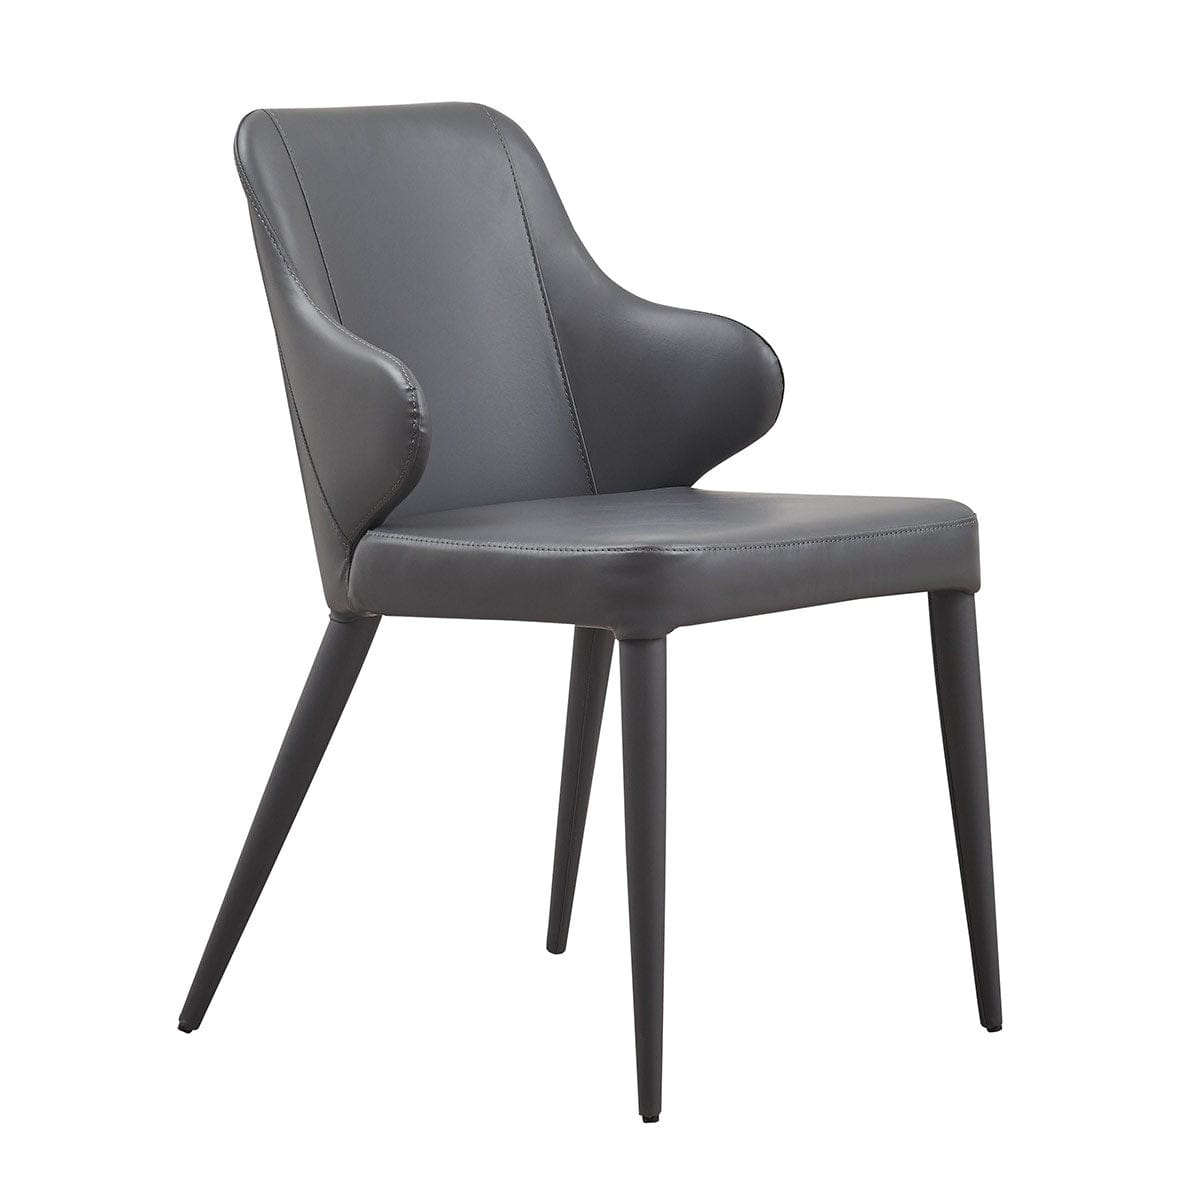 J and M Furniture Dining Chair San Francisco Dining Chair in Grey | J&M Furniture